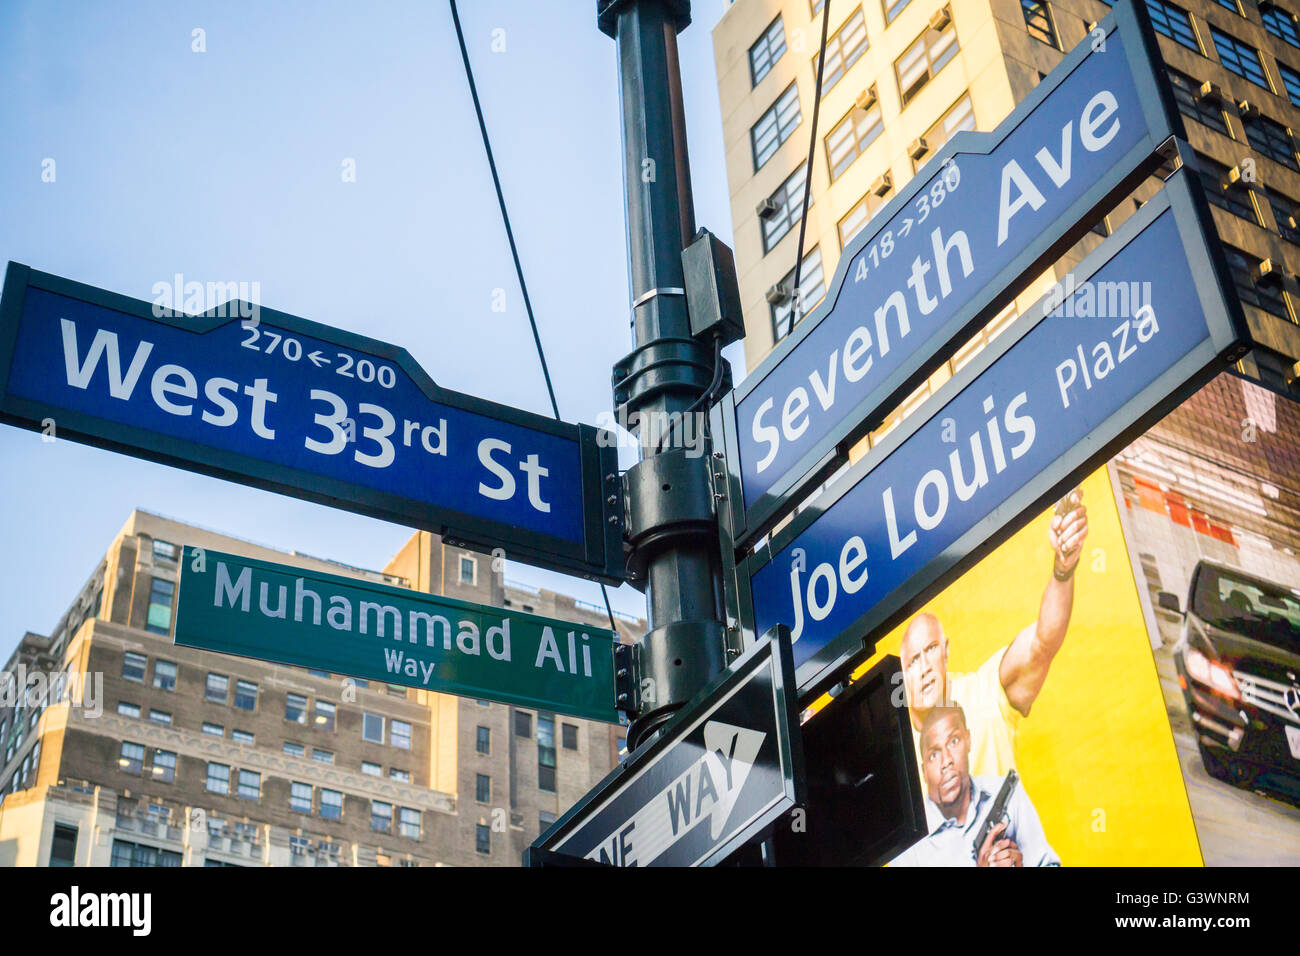 New York commemorates the late boxing legend Muhammad Ali by temporarily renaming West 33rd Street next to Madison Square Garden as 'Muhammad Ali Way', seen on Tuesday, June 7, 2016. Ali fought Joe Frazier in the famous arena in 1971 in what was billed as the 'Fight of the Century'. Ali passed away June 3 at the age of 74. (© Richard B. Levine) Stock Photo